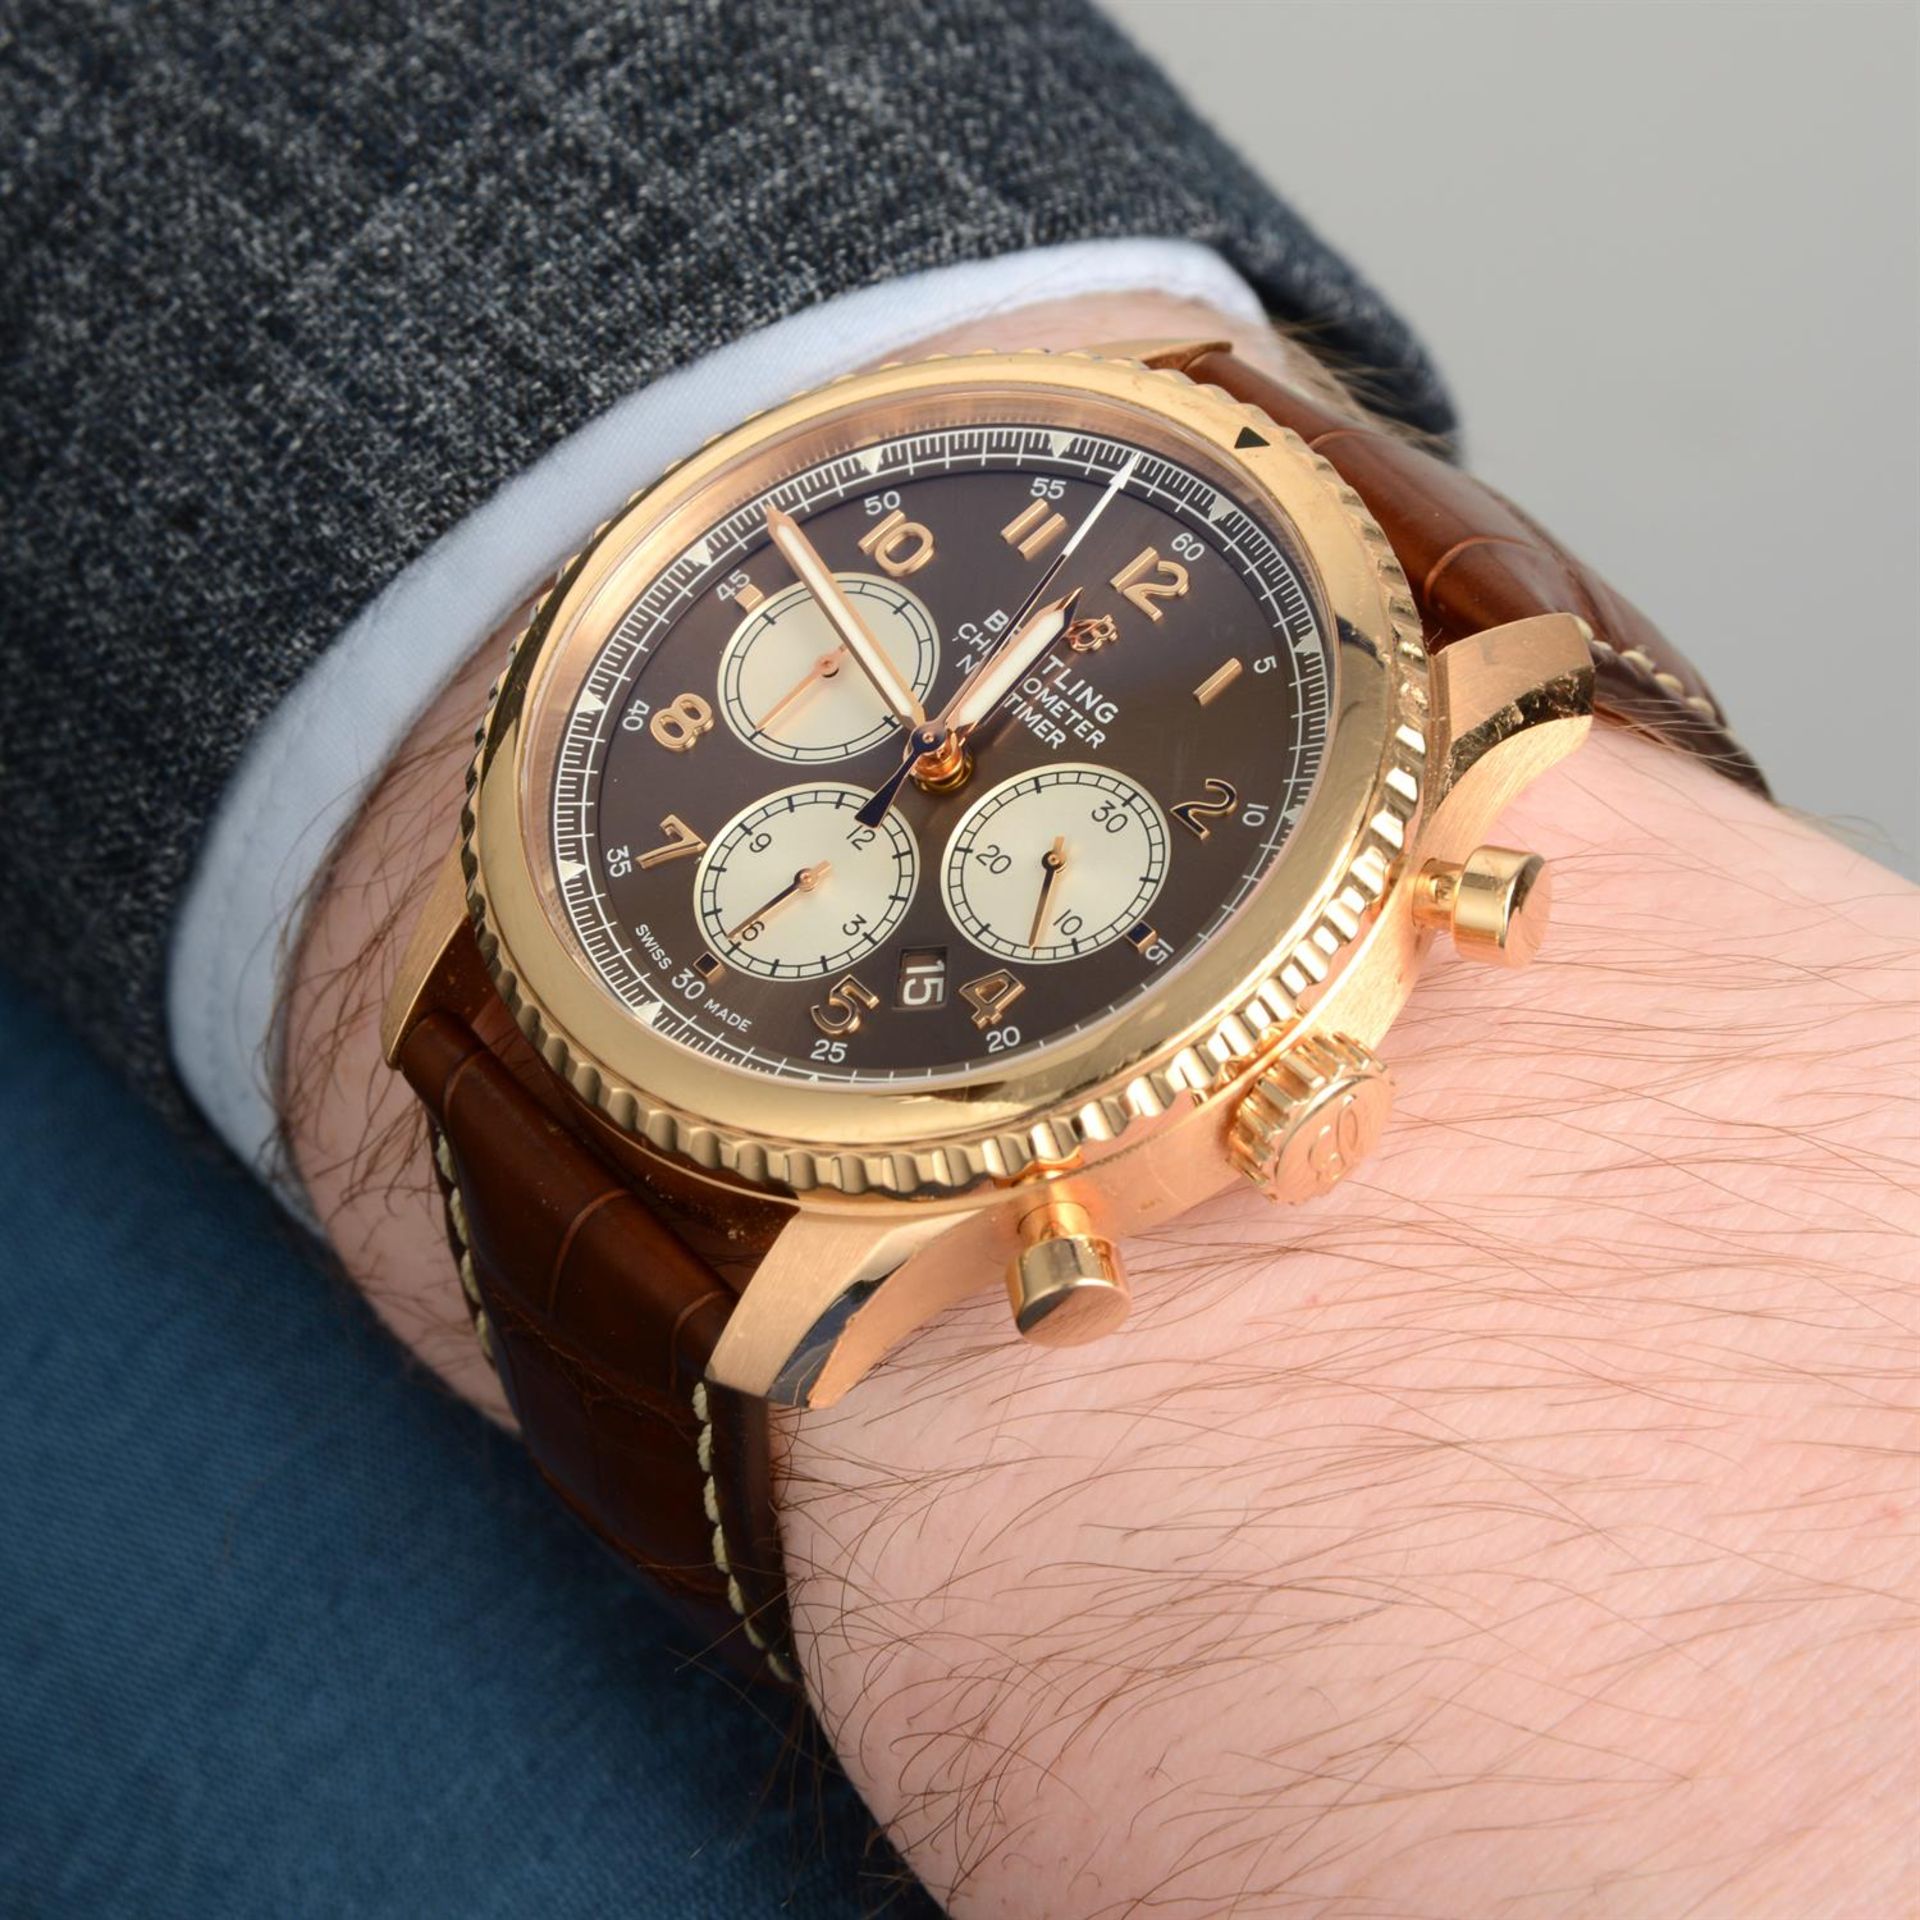 BREITLING - an 18ct rose gold Navitimer chronograph wrist watch, 43mm. - Image 5 of 5